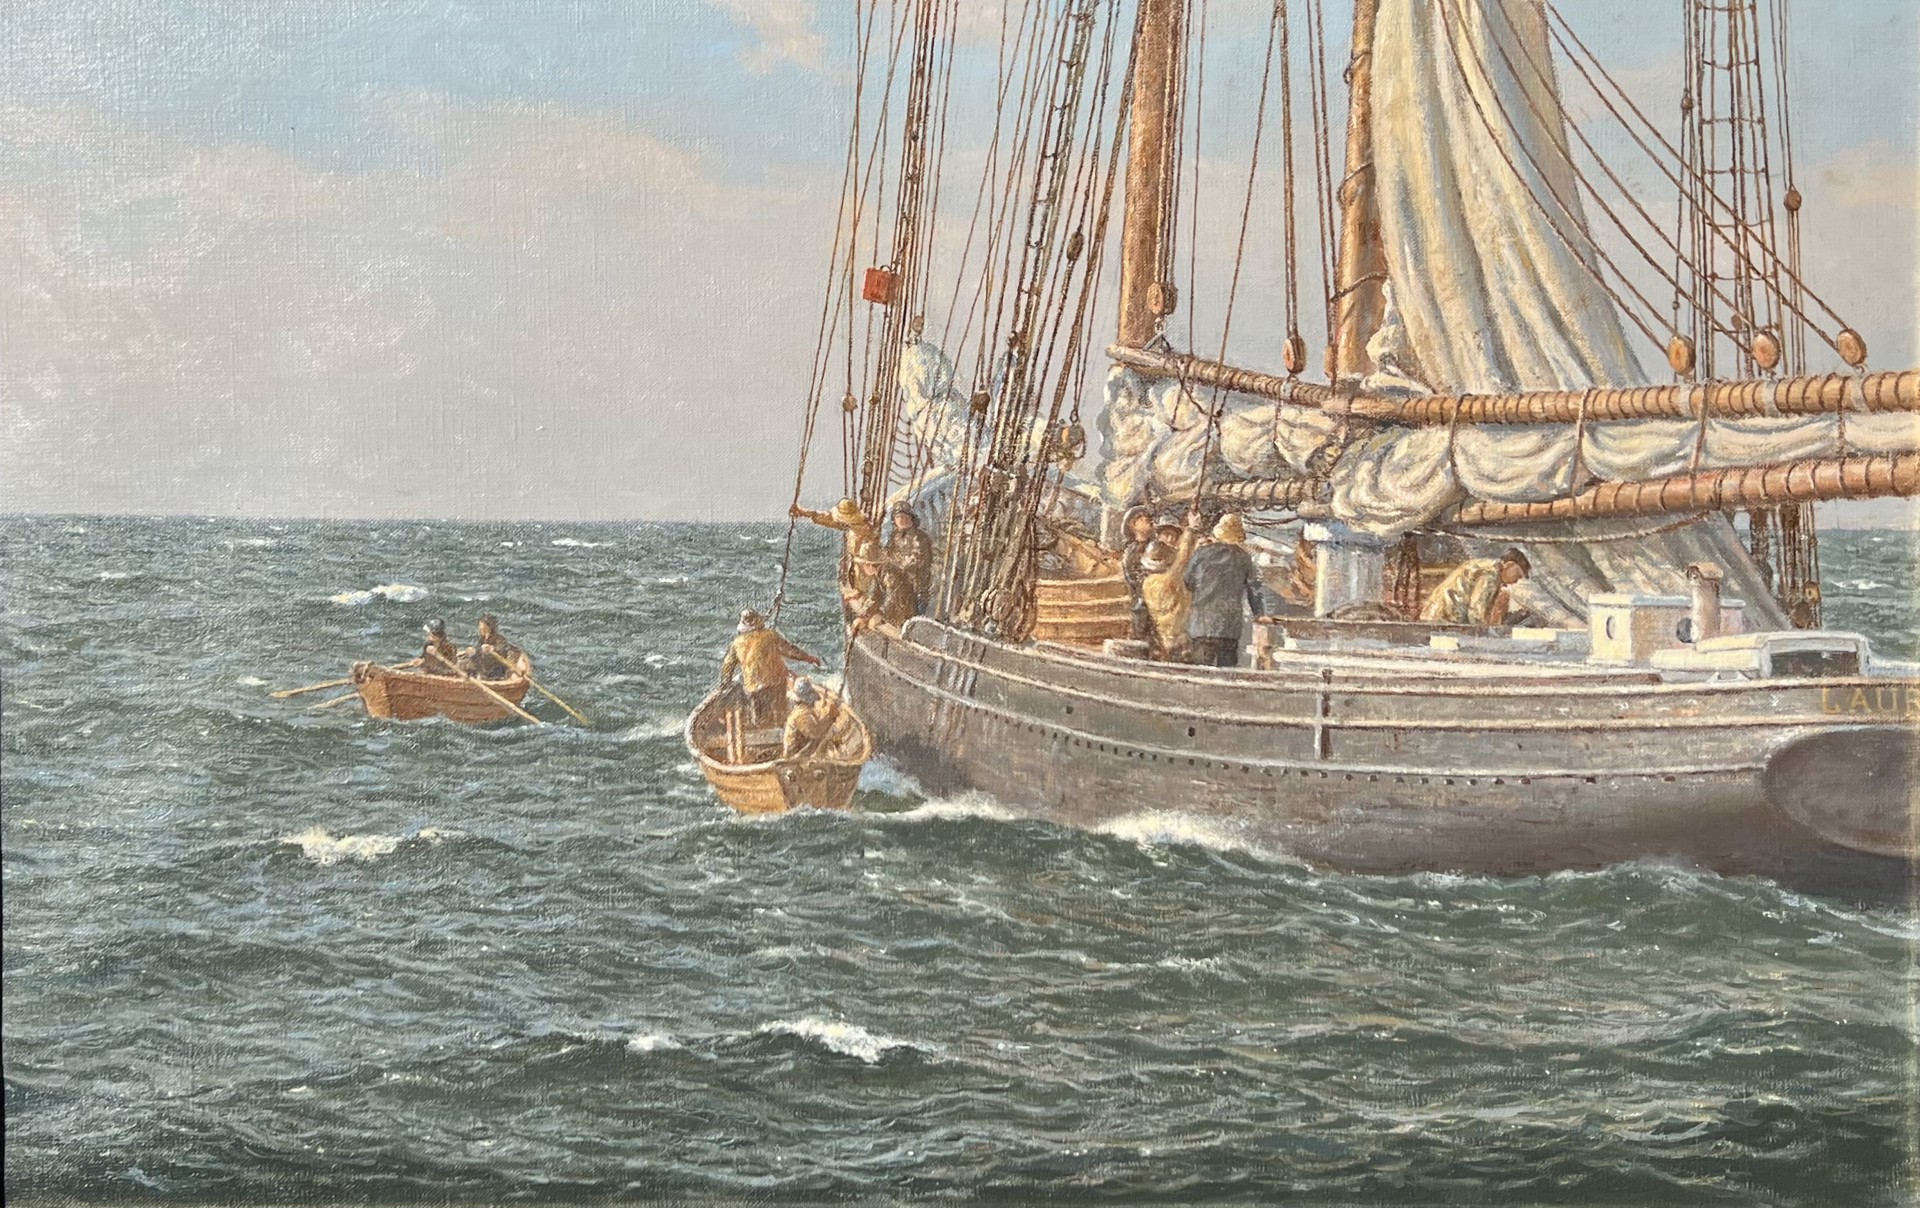 On George’s Bank, Gloucesterman Setting the Trysail 1920 by Richard K. Loud